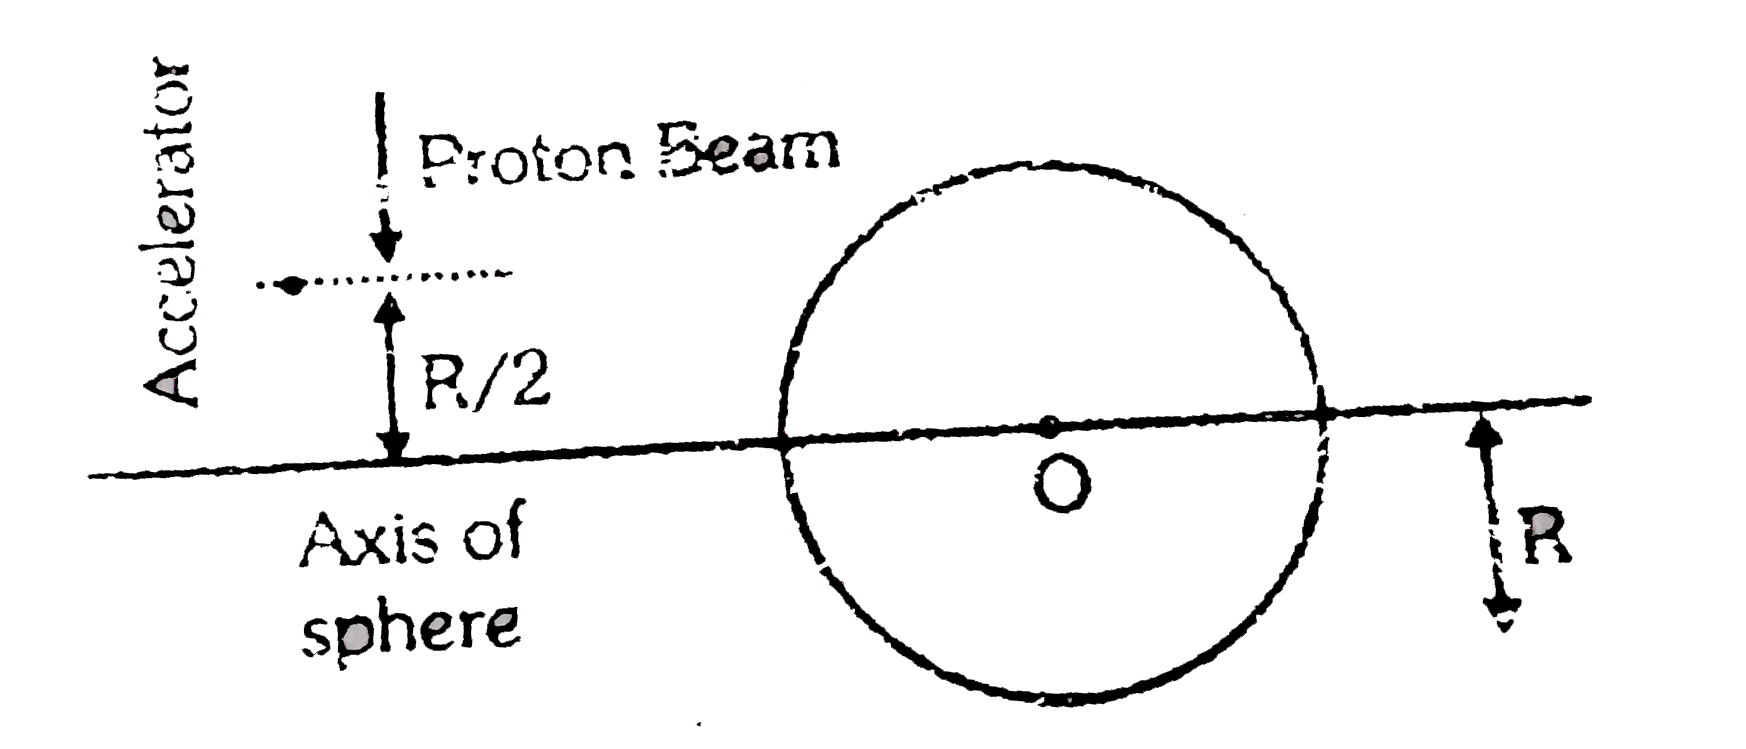 An accelration produces a narrow beam of protons, each having an initial speed of v(0). The beam is directed towards an initially uncharges distant metal sphere of radius R and centered at point O. The initial path of the beam is parallel to the axis of the sphere at a distance of (R//2) from the axis, as indicated in the diagram.      The protons in the beam that collide with the sphere will cause it to becomes charged. The subsequentpotential field at the accelerator due to the sphere can be neglected. The angular momentum of a particle is defined in a similar way to the moment of a force. It is defined as the moment of its linear momentum, linear replacing the force. We may assume the angular momentum of a proton about point O to be conserved. Assume the mass of the proton as m(P) and the charge on it as e. Given that the potential of the sphere increases with time and eventually reaches a constant velue.   The total energy (E) of a proton in the beam travelling with seed v at a distance of r (r ge R) from point O. Assuming that the sphere has acquired an electrostatic charge Q is